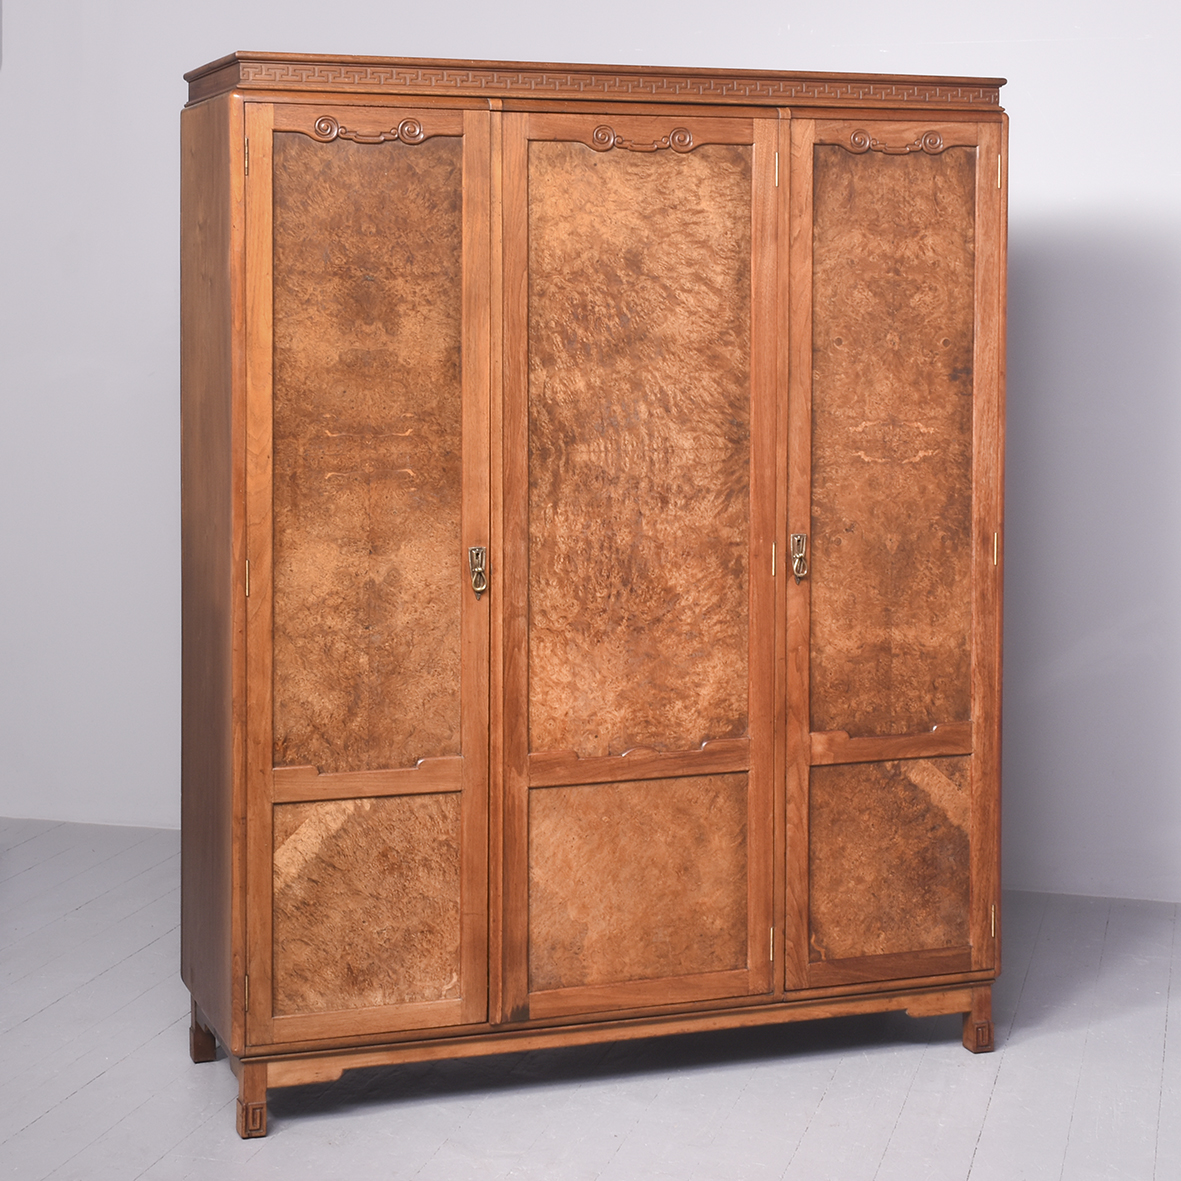 Three Door Art Deco Influence Burr Walnut Wardrobe by Famous Cabinetmakers Wylie & Lochhead of Glasgow Antique Furniture 3